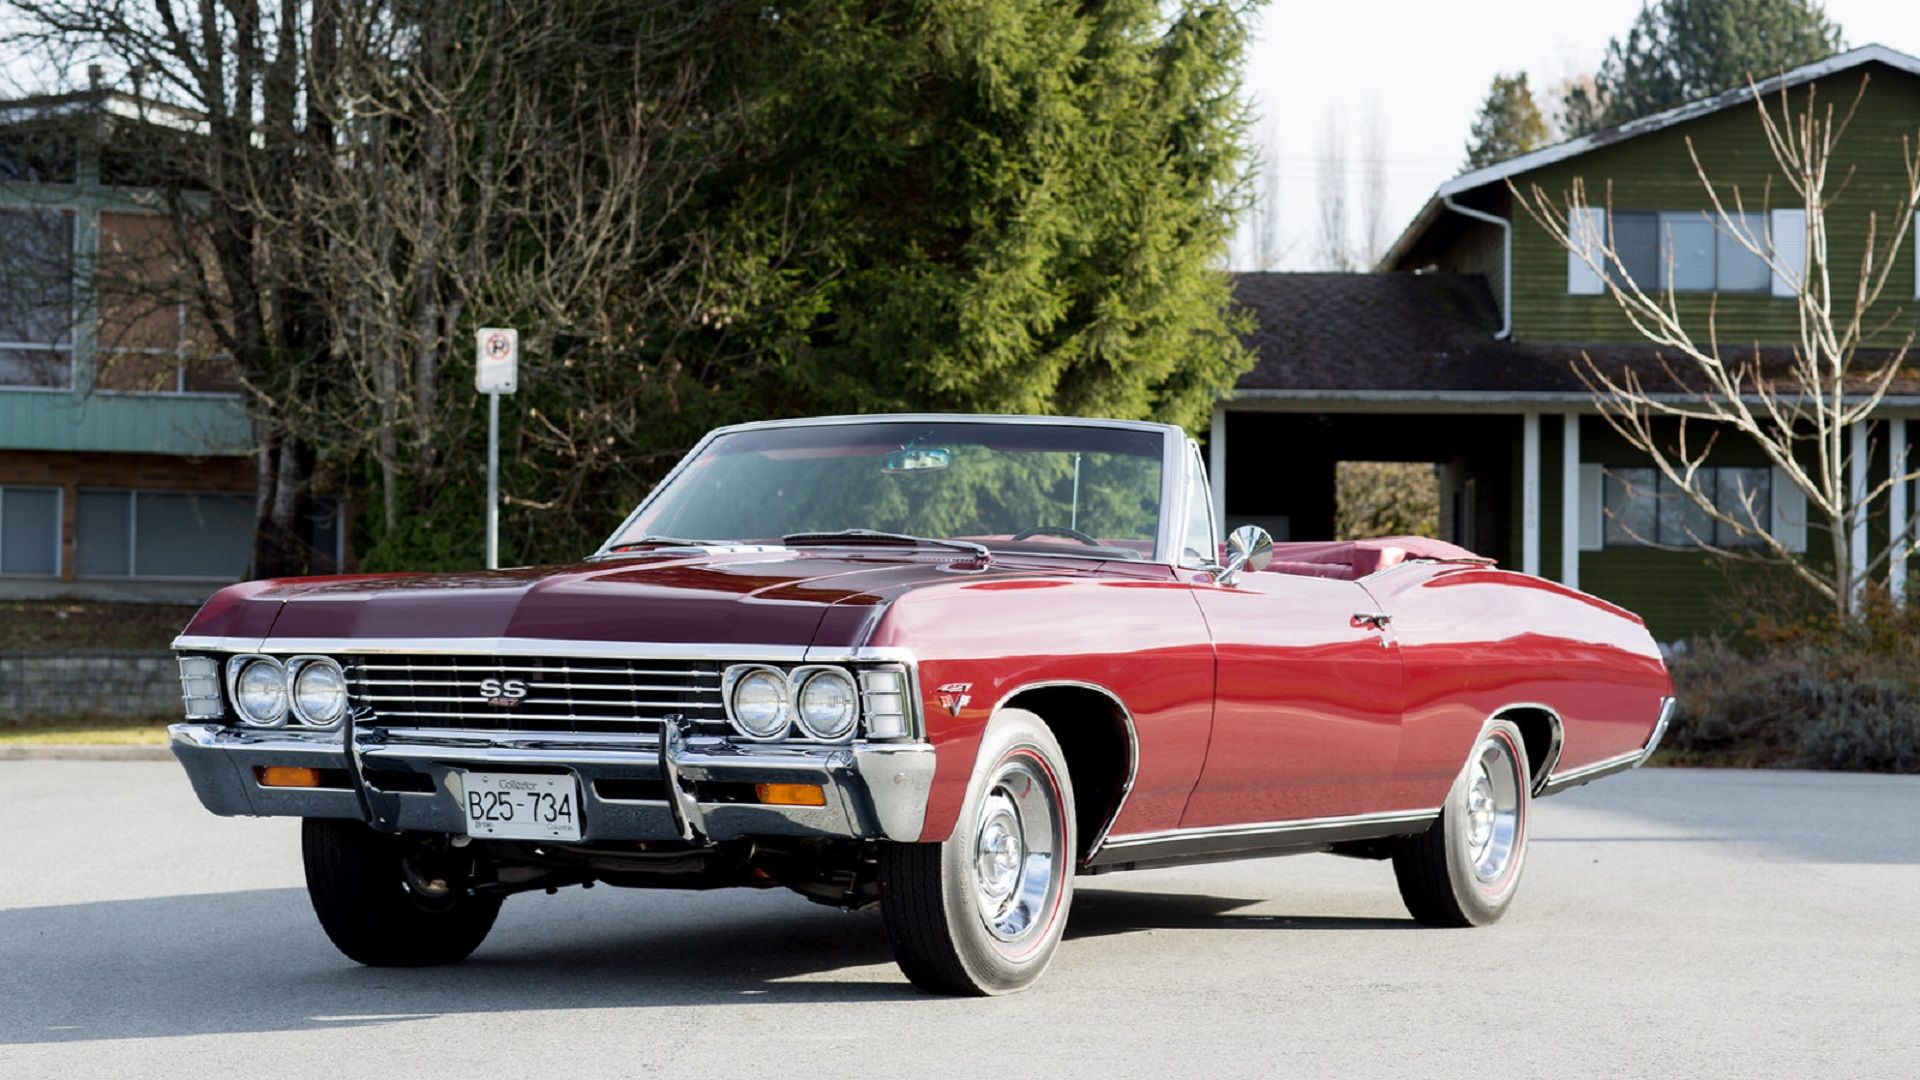 A parked 1967 Chevrolet 427 SS